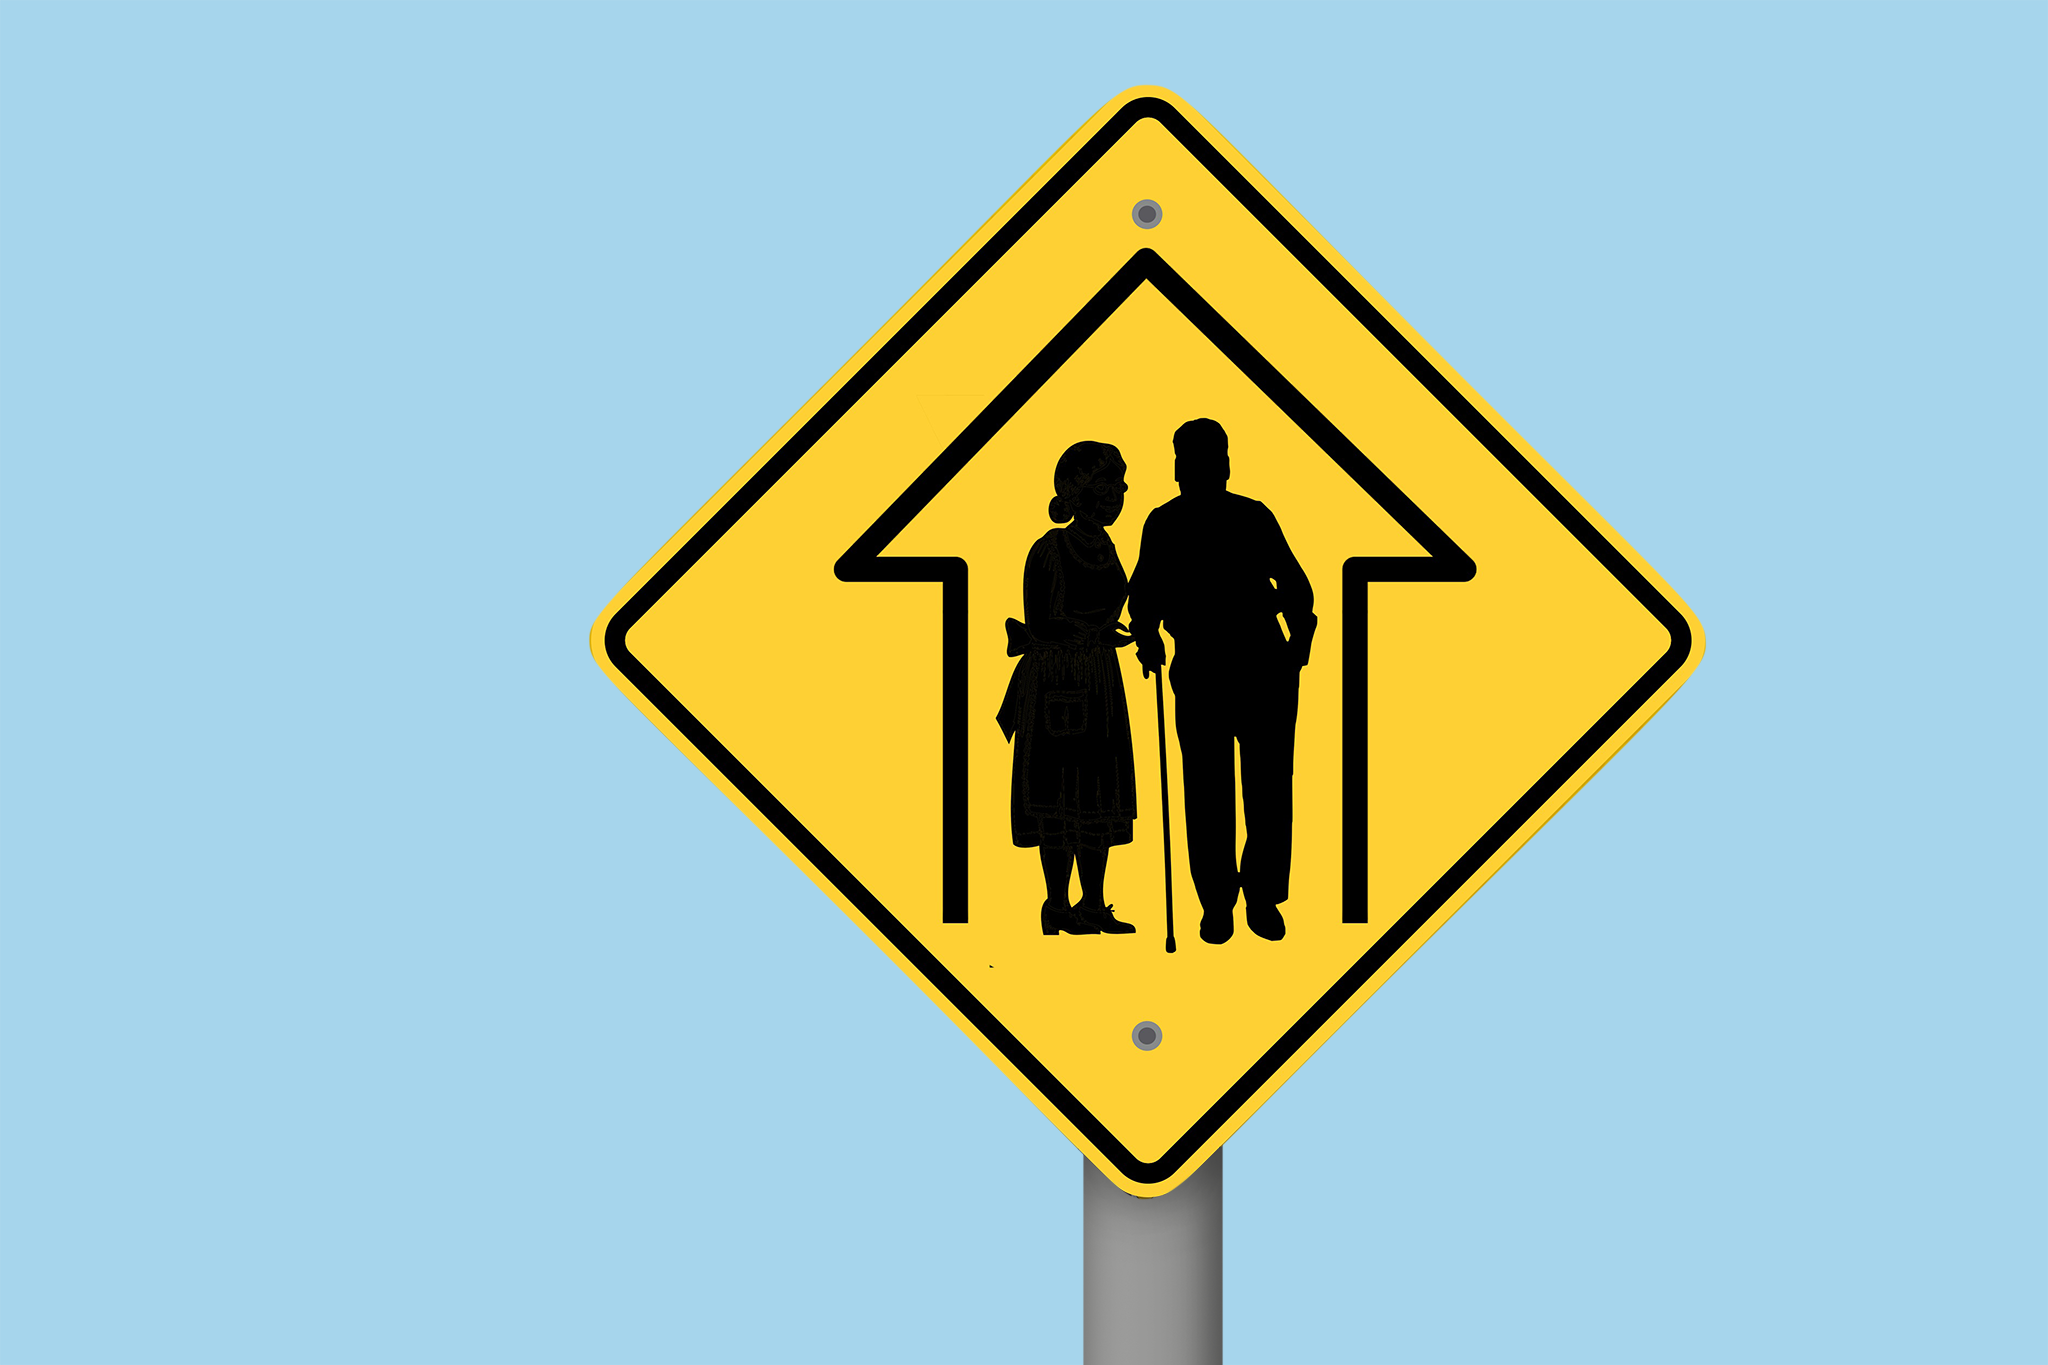 A yellow traffic sign depicting two elderly people pictogram. TU Vienna blue background. 